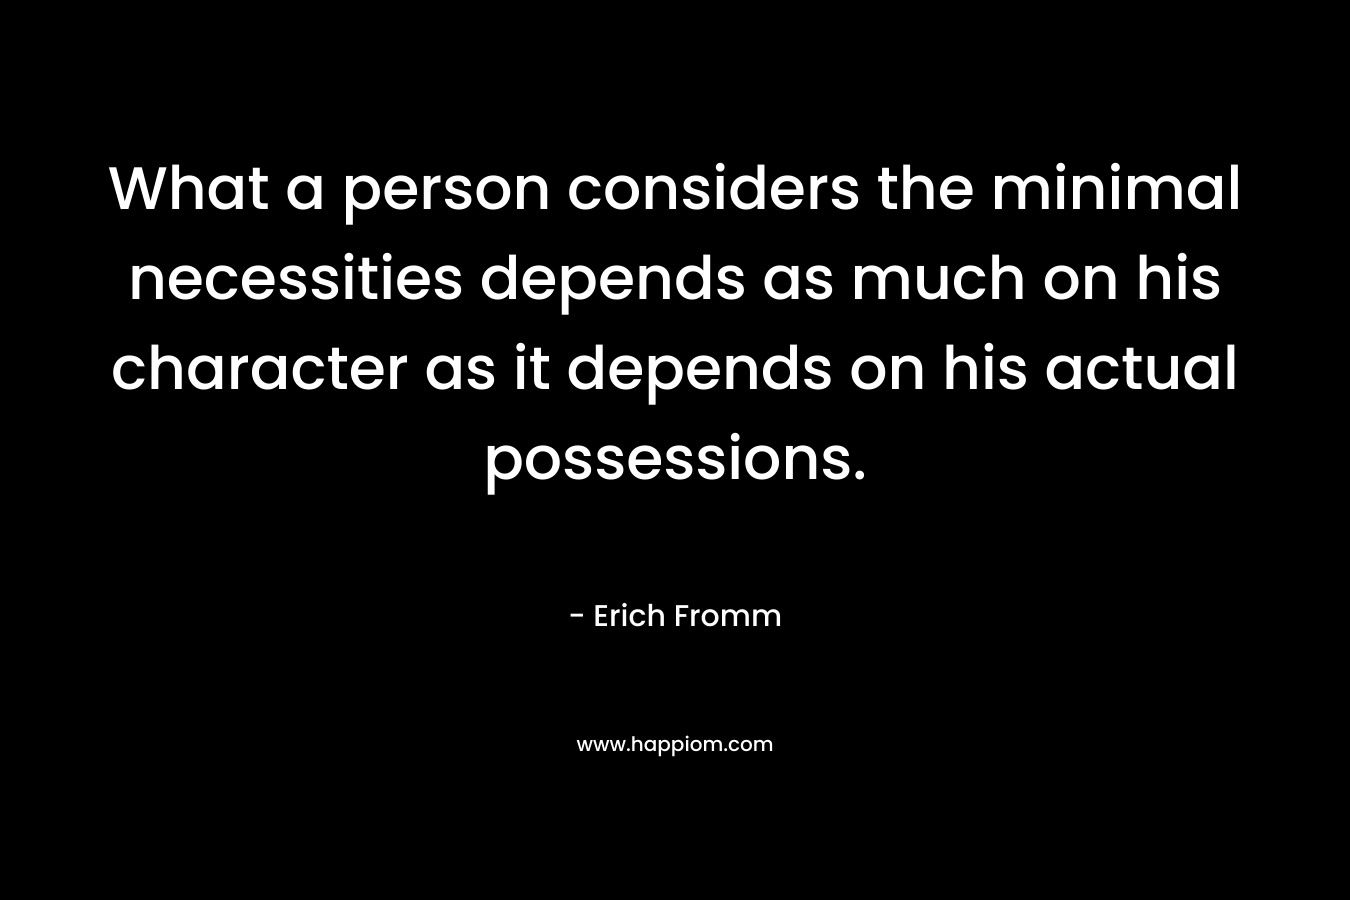 What a person considers the minimal necessities depends as much on his character as it depends on his actual possessions. – Erich Fromm